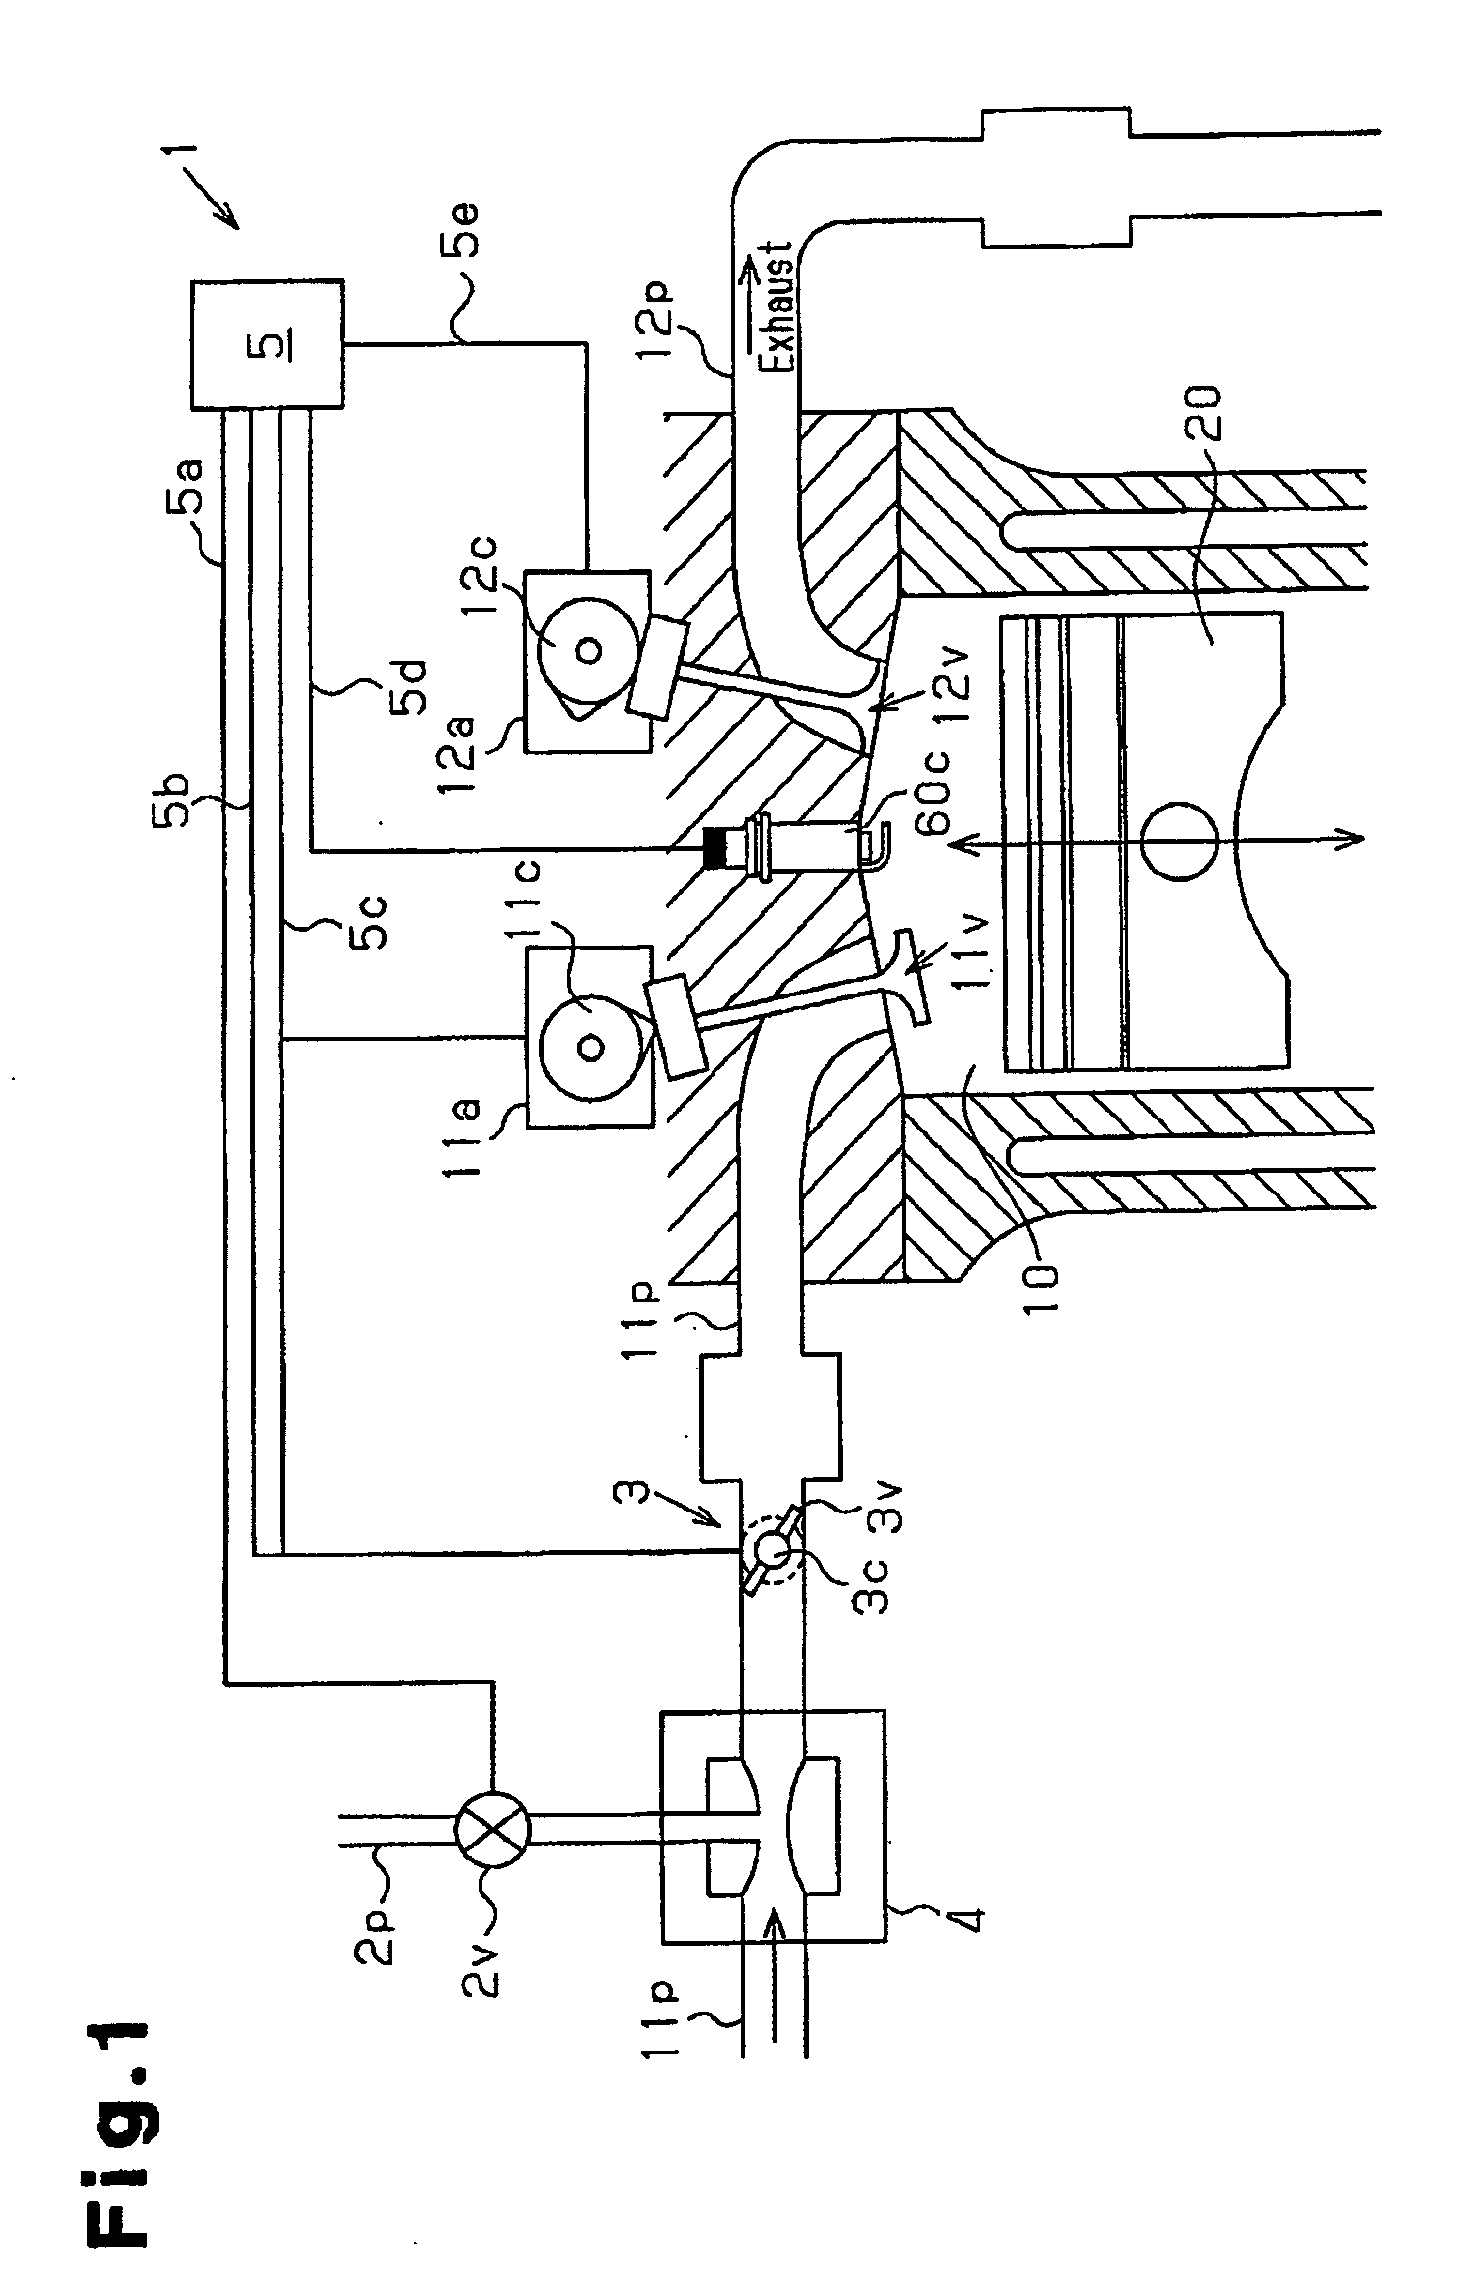 Homogenous charge compression ignition engine and controlling method of the engine